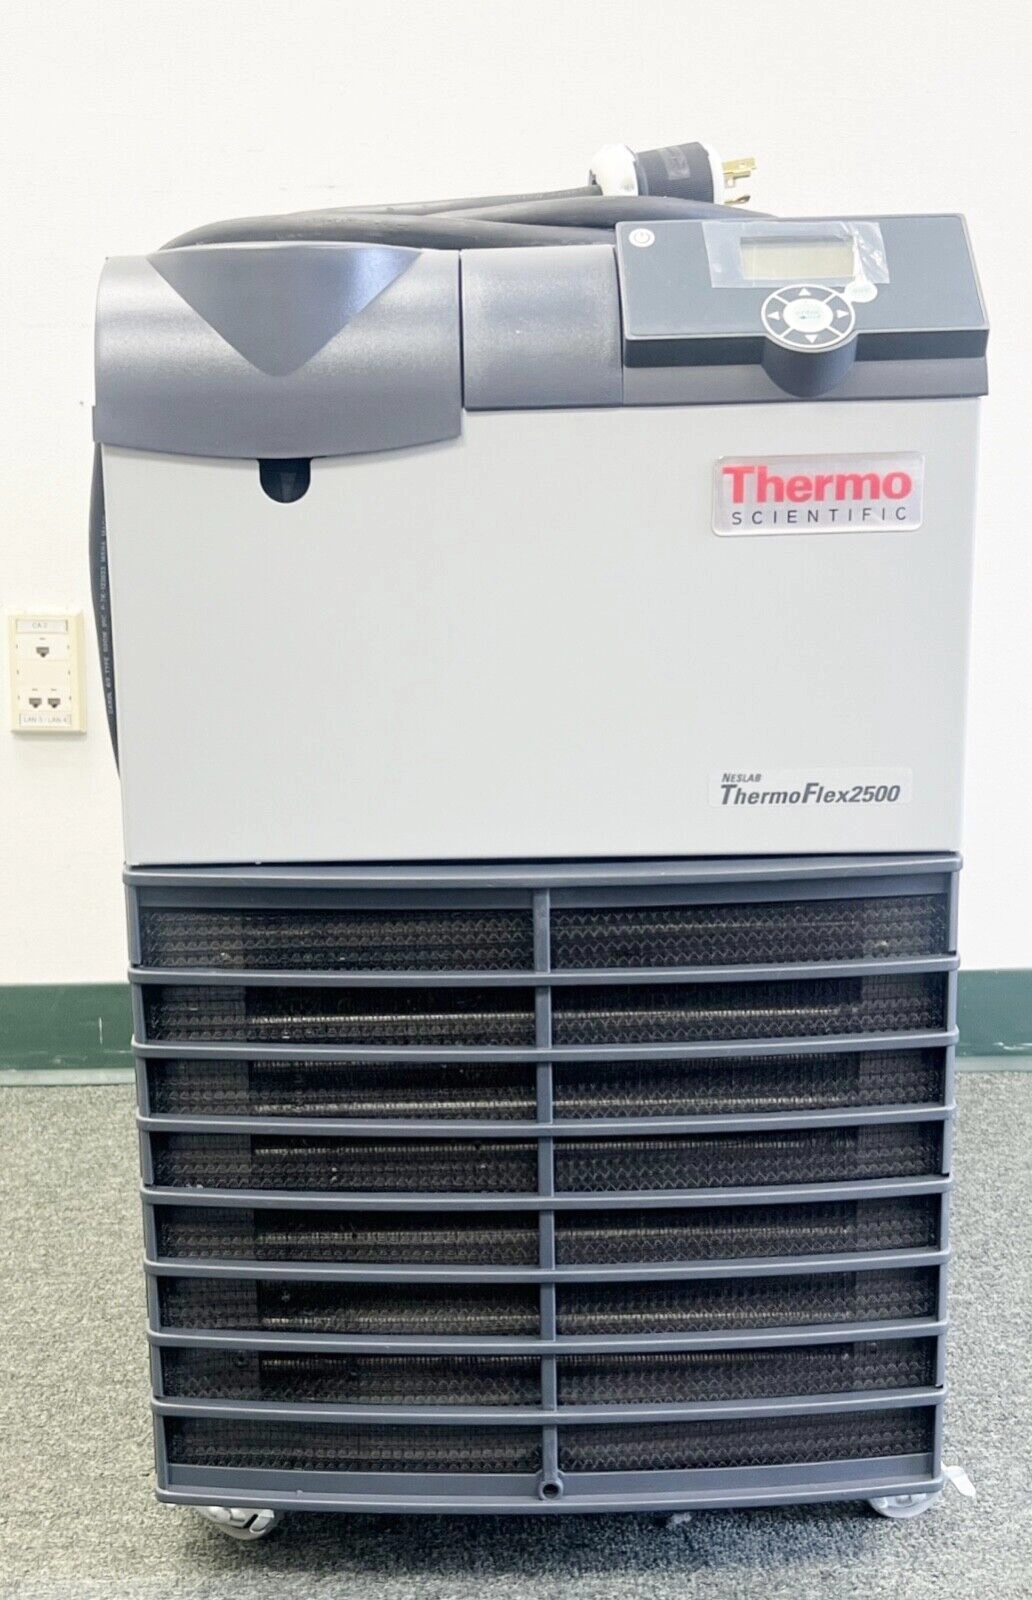 Thermo Scientific ThermoFlex2500 Refrigerated and 